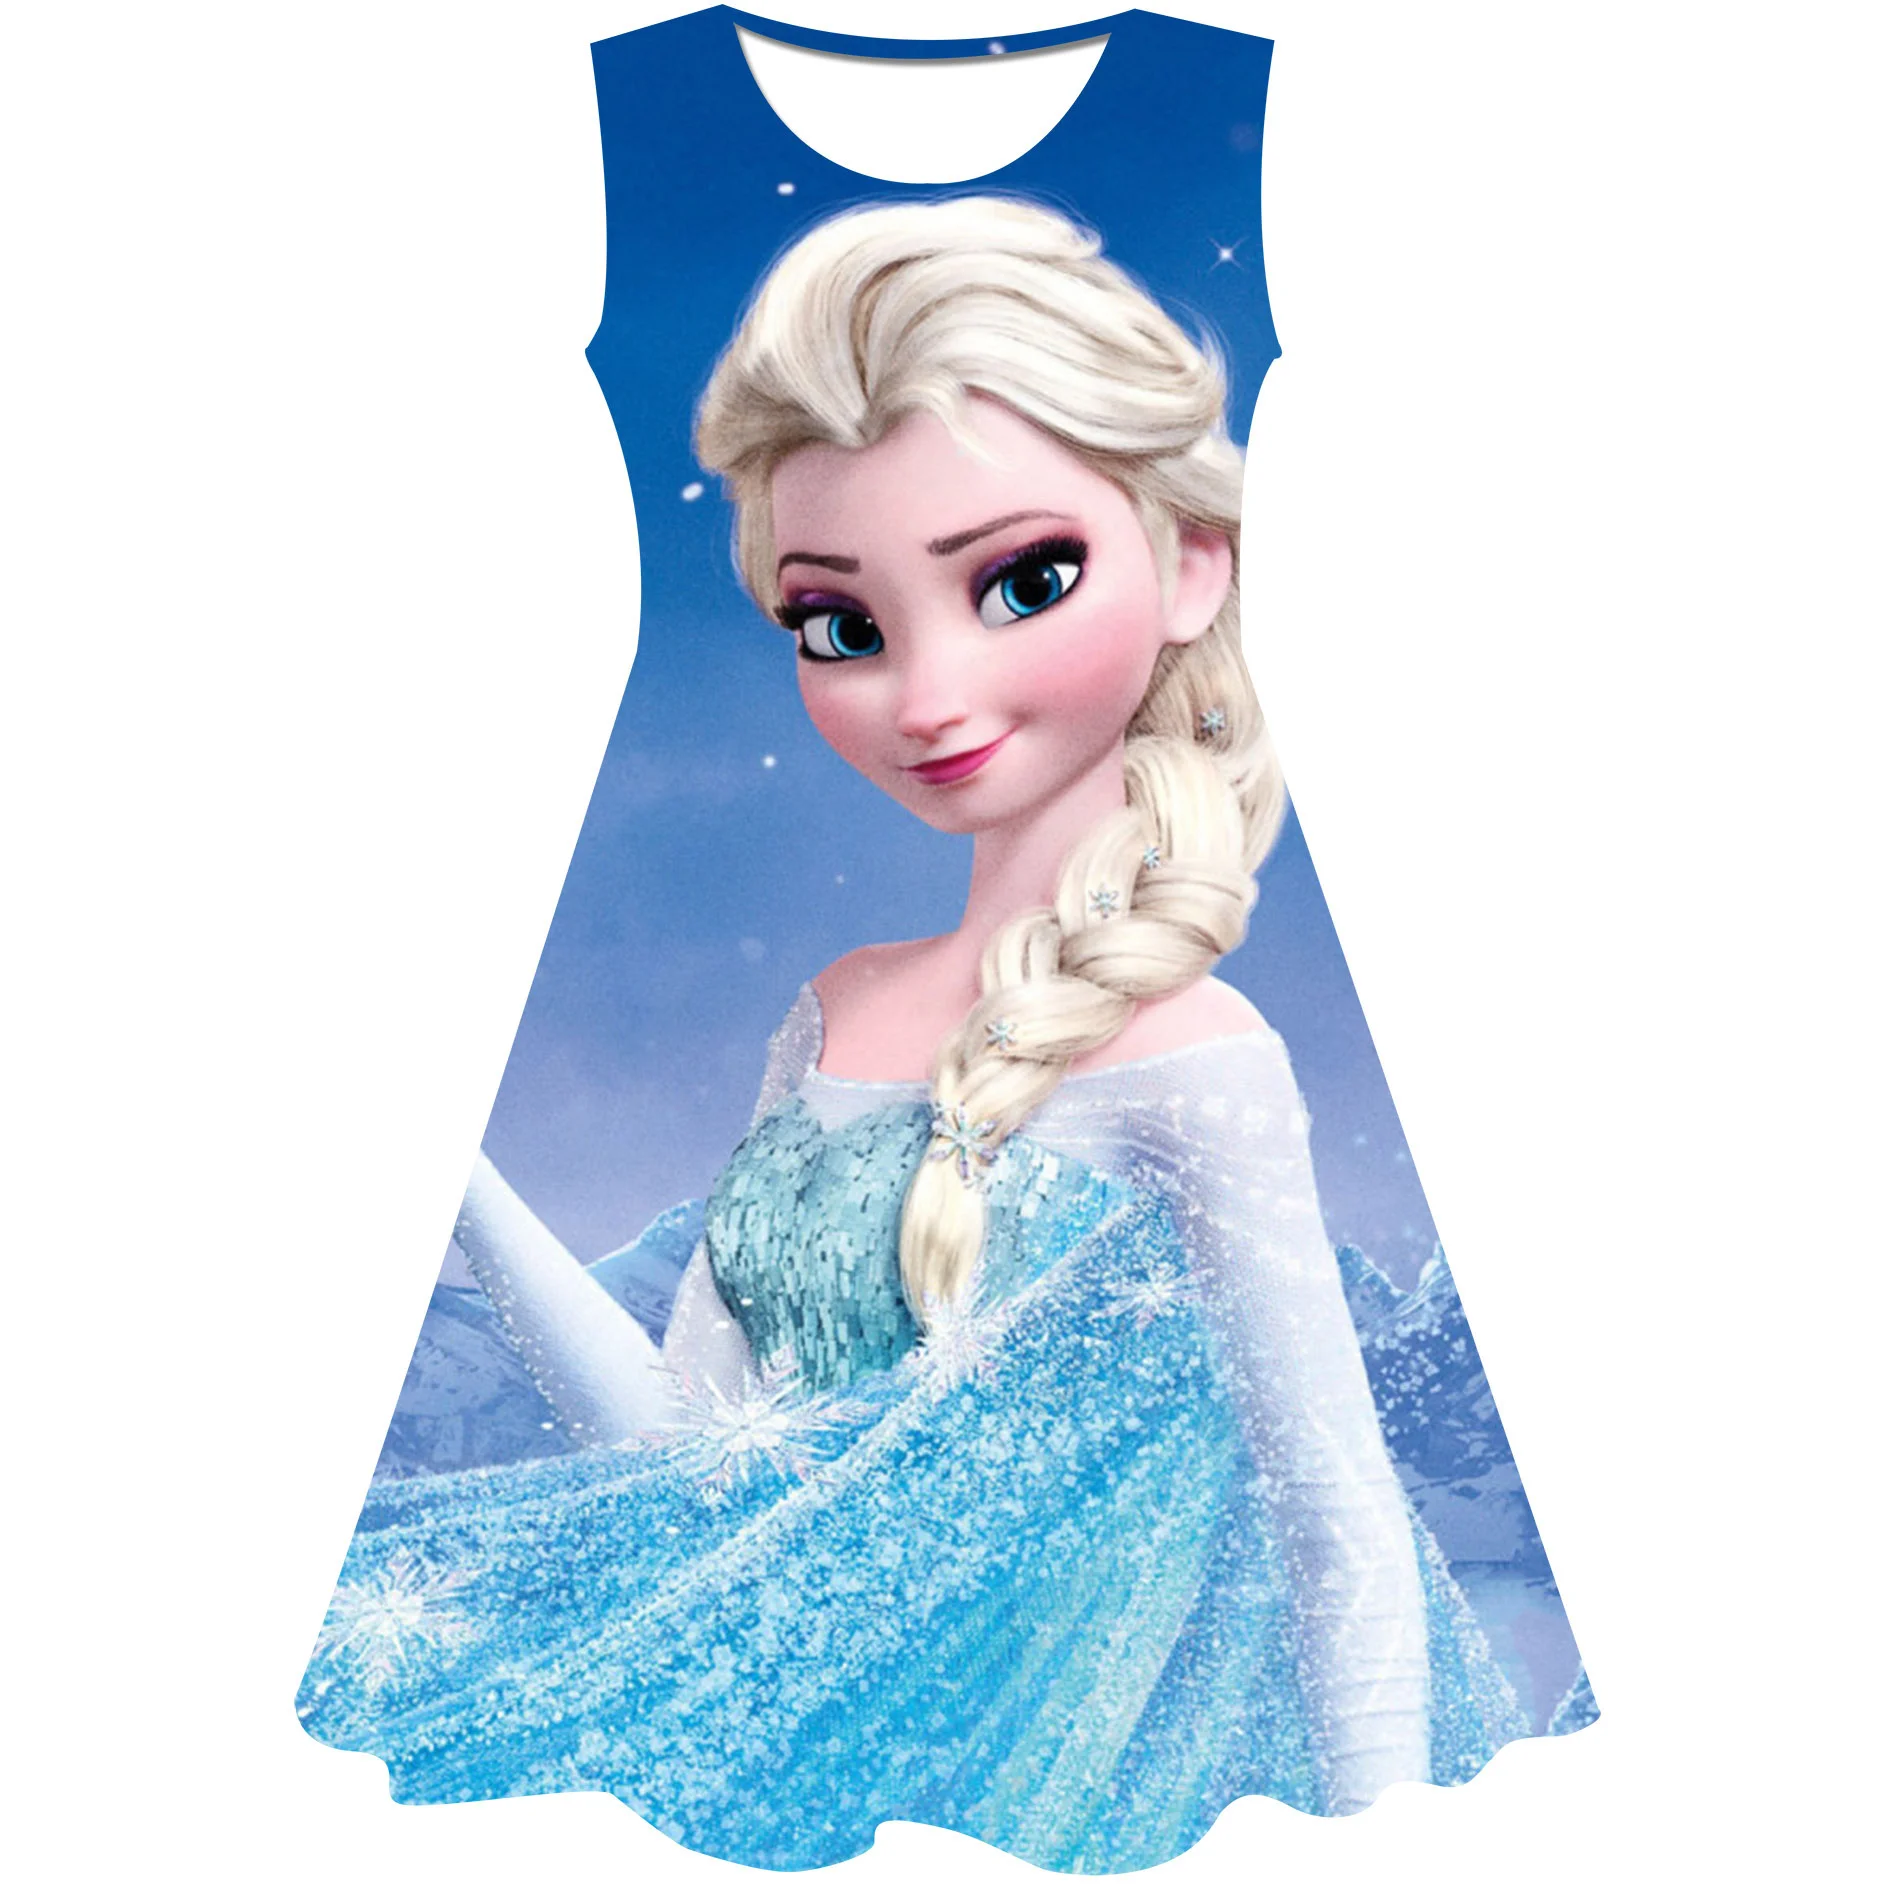 Disney Frozen 2 Dress Costumes Girls Princess Elsa Dress Ball Gown Birthday Kids Snow Queen Cosplay Carnival Clothing 1-10 Years